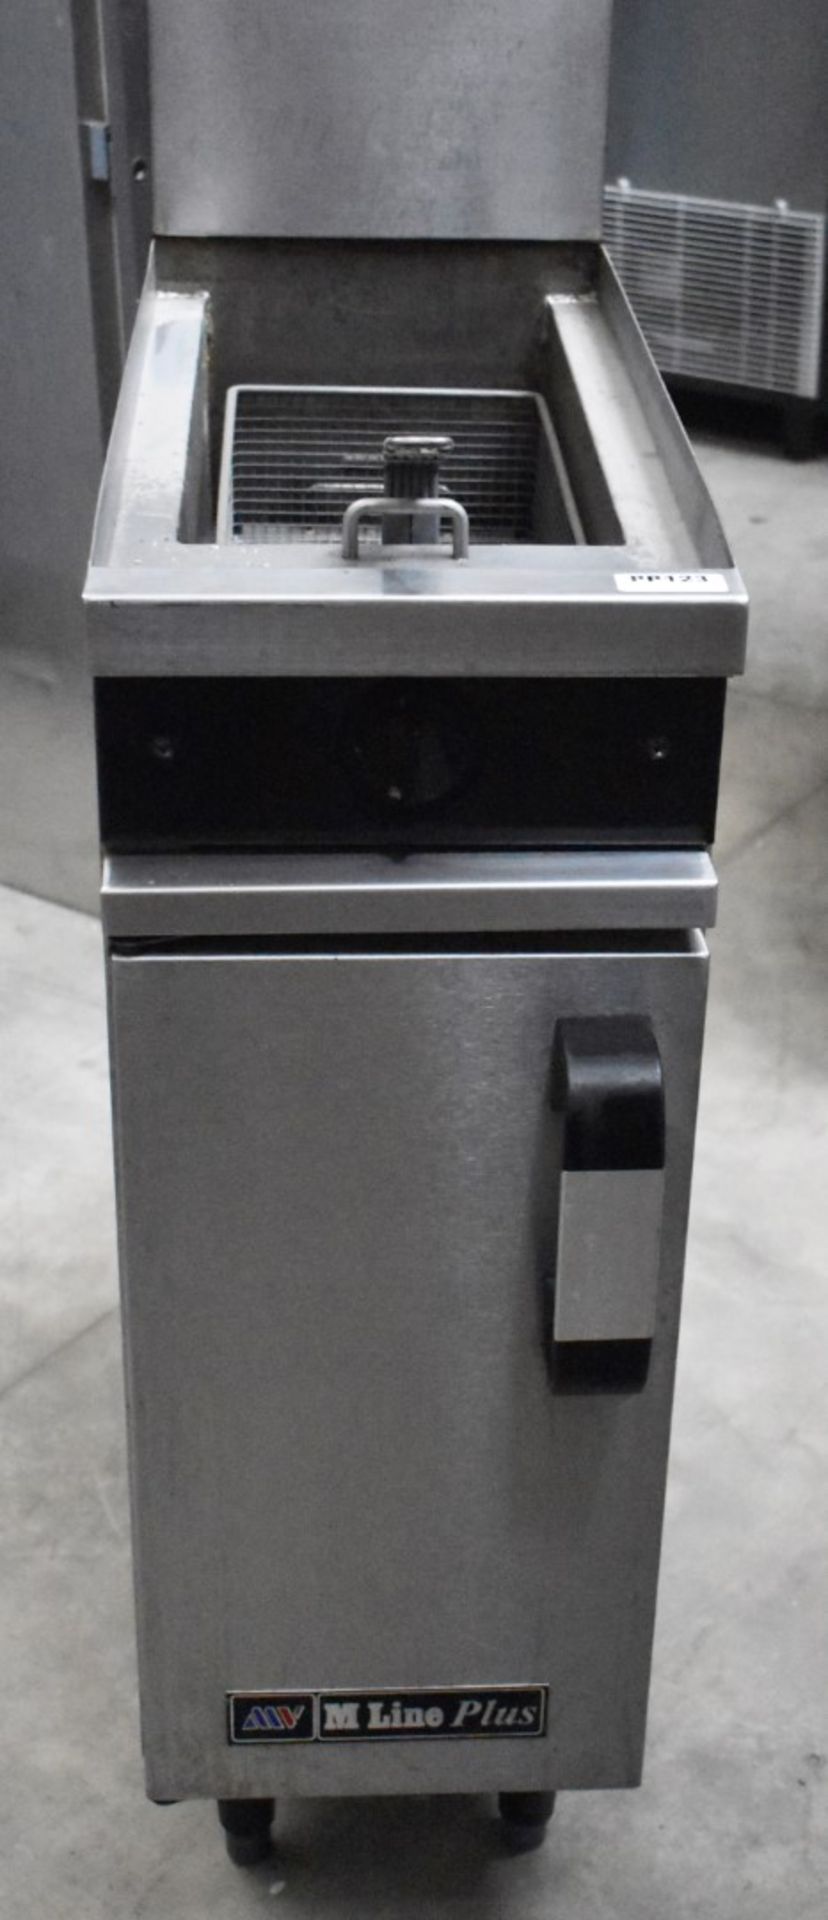 1 x Moorwood Vulcan M Line Plus Single Tank 30cm Gas Fryer - Model 30FD - Recently Removed From a - Image 2 of 12